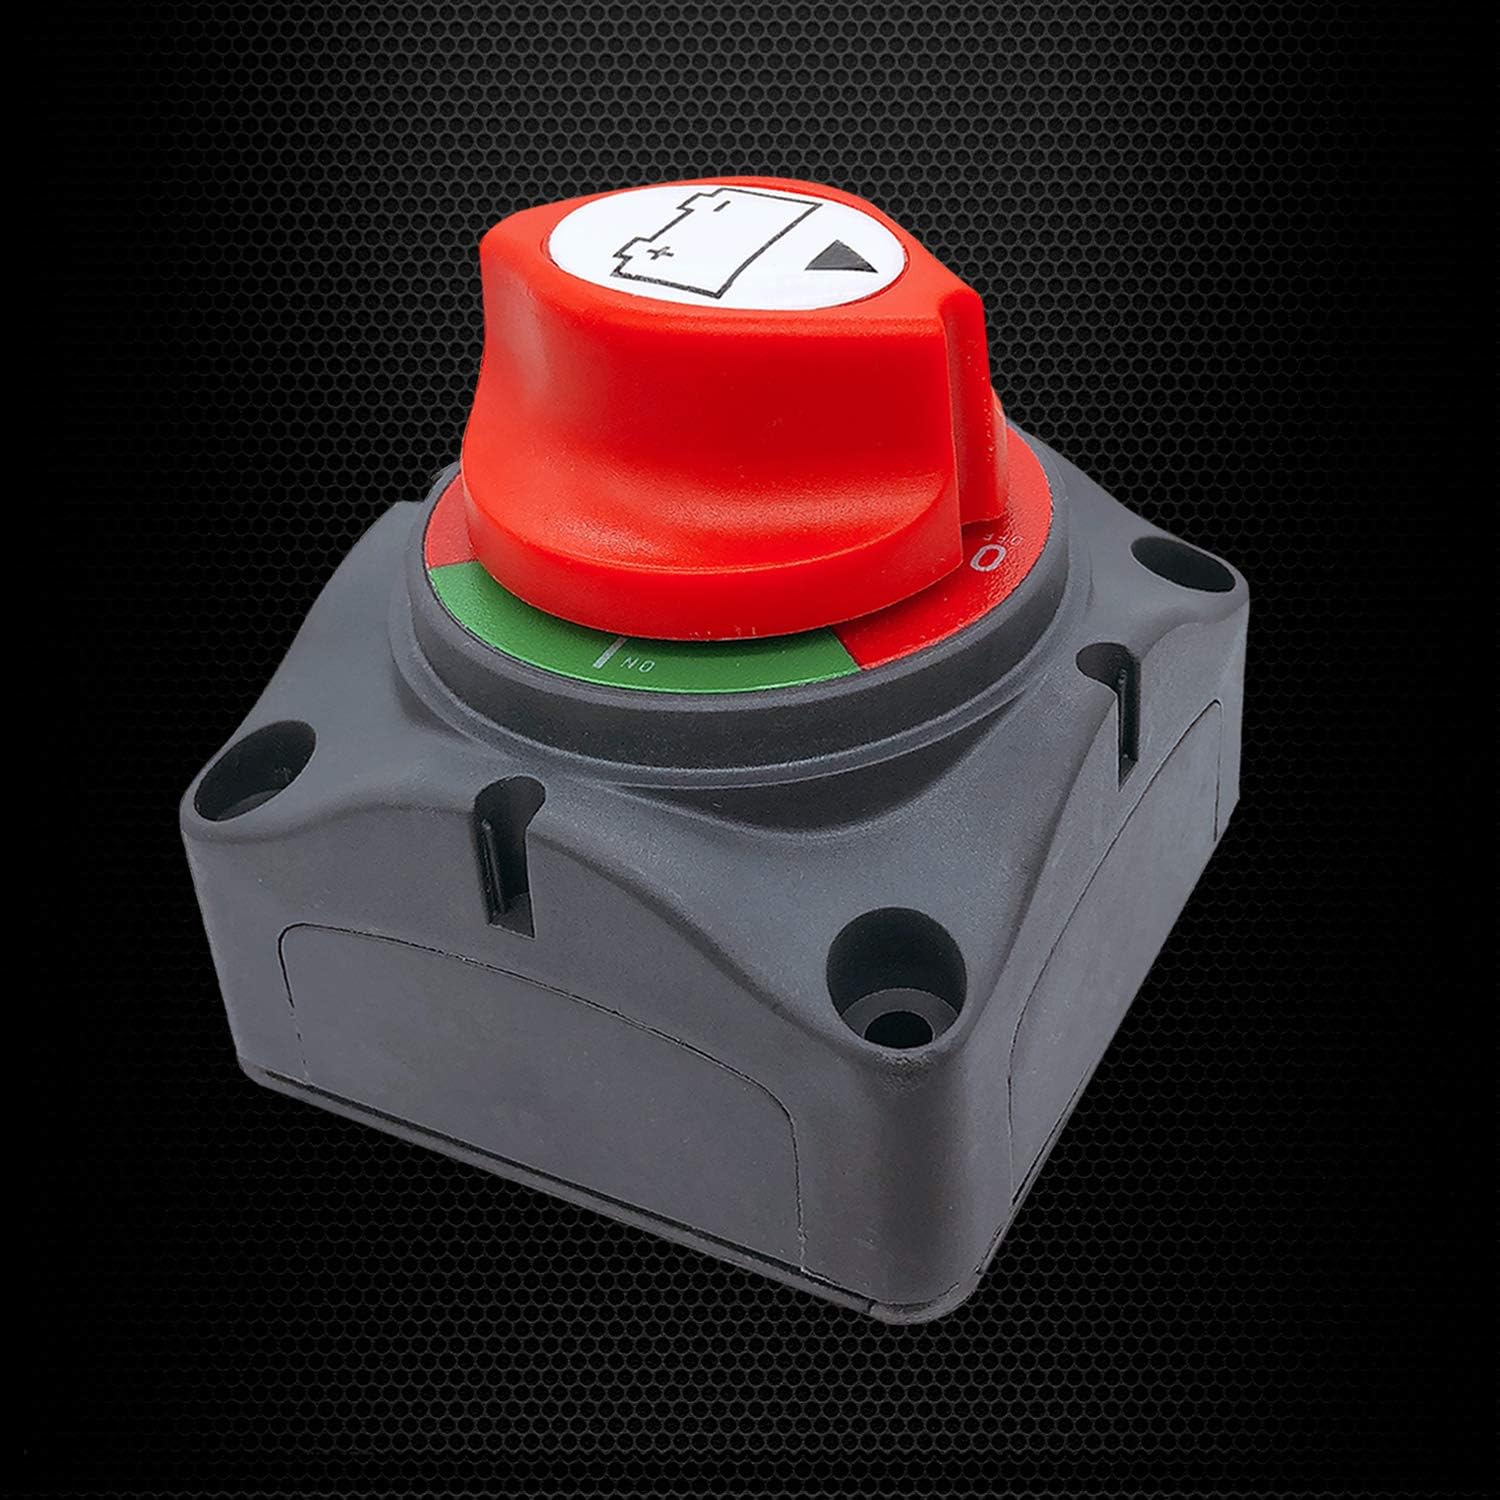 Battery Switch, 12-48 V Battery Power Cut Master Switch Disconnect Isolator for Car, Vehicle, RV and Boat (On/Off)